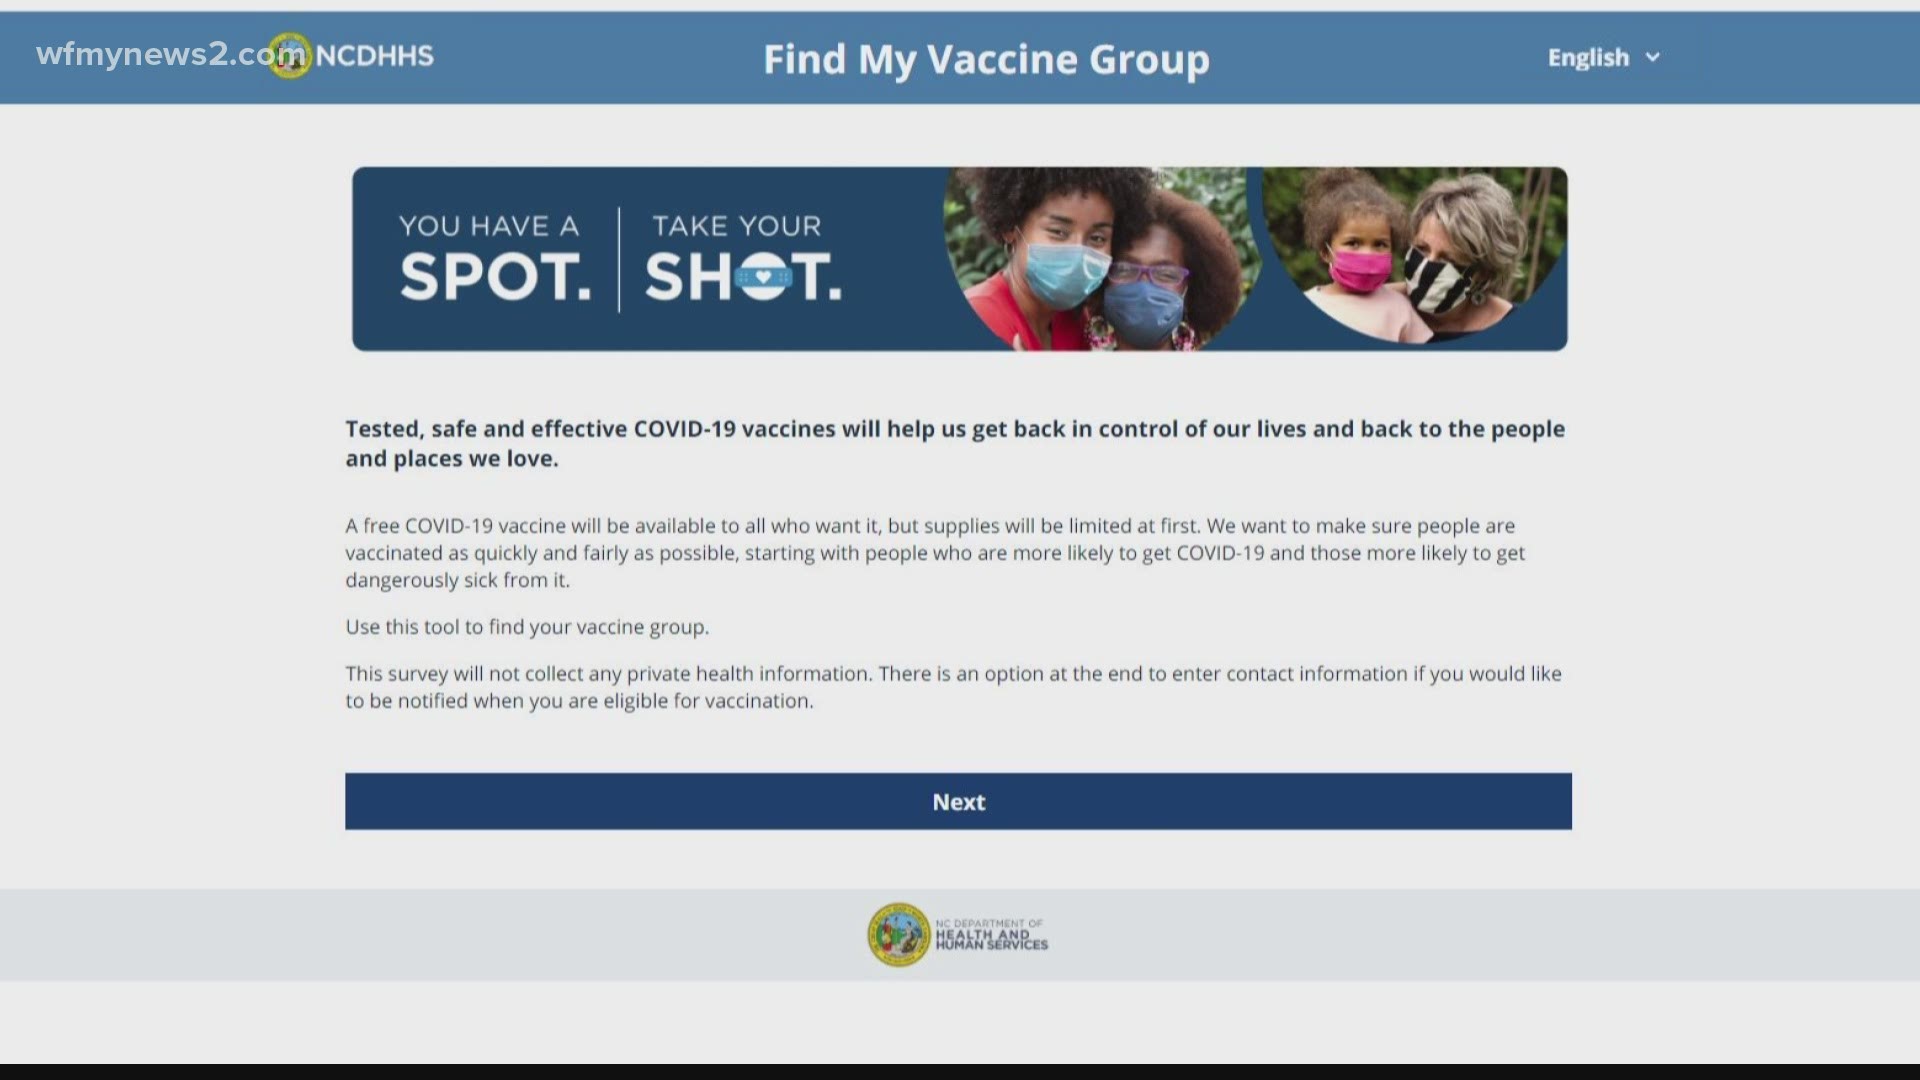 The NCDHHS unveiled a tool to help people determine their vaccine groups, so they can book appointments as soon as county clinics open shots to those groups.